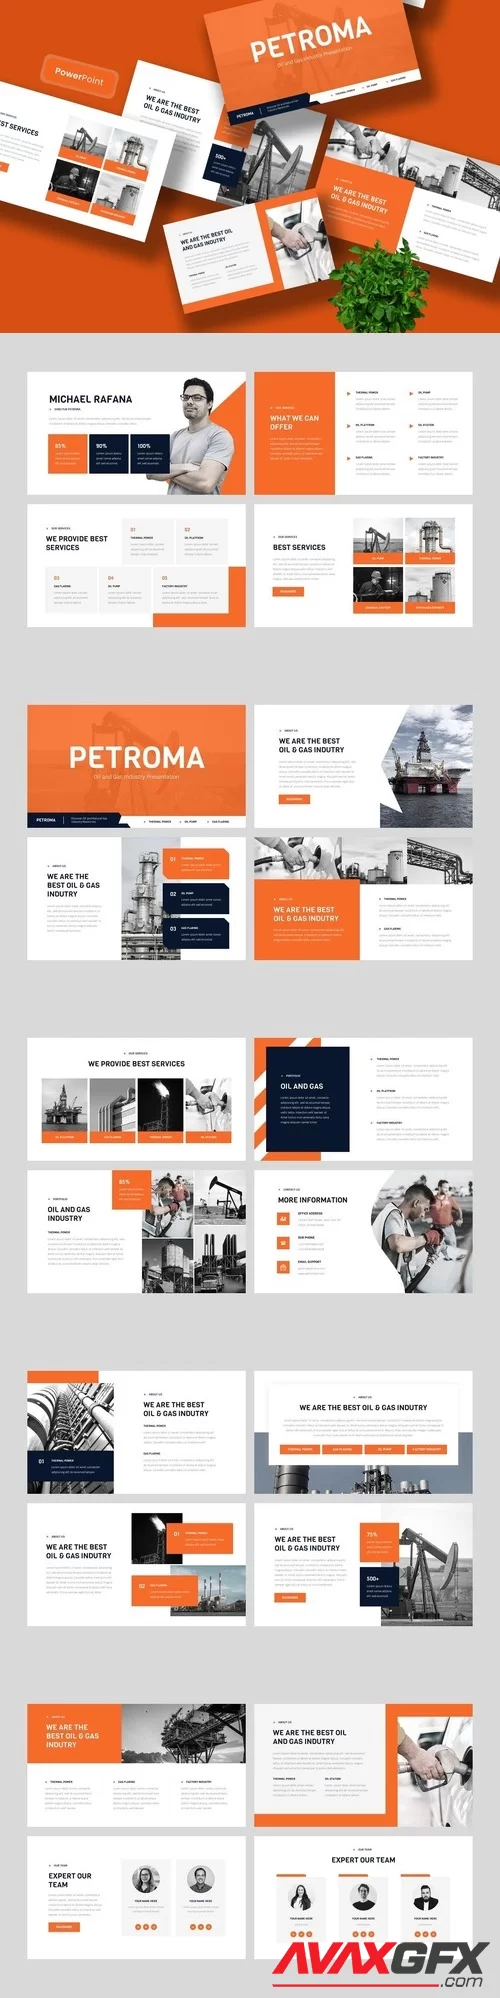 Petroma - Oil & Gas Industry PowerPoint Template PPTX